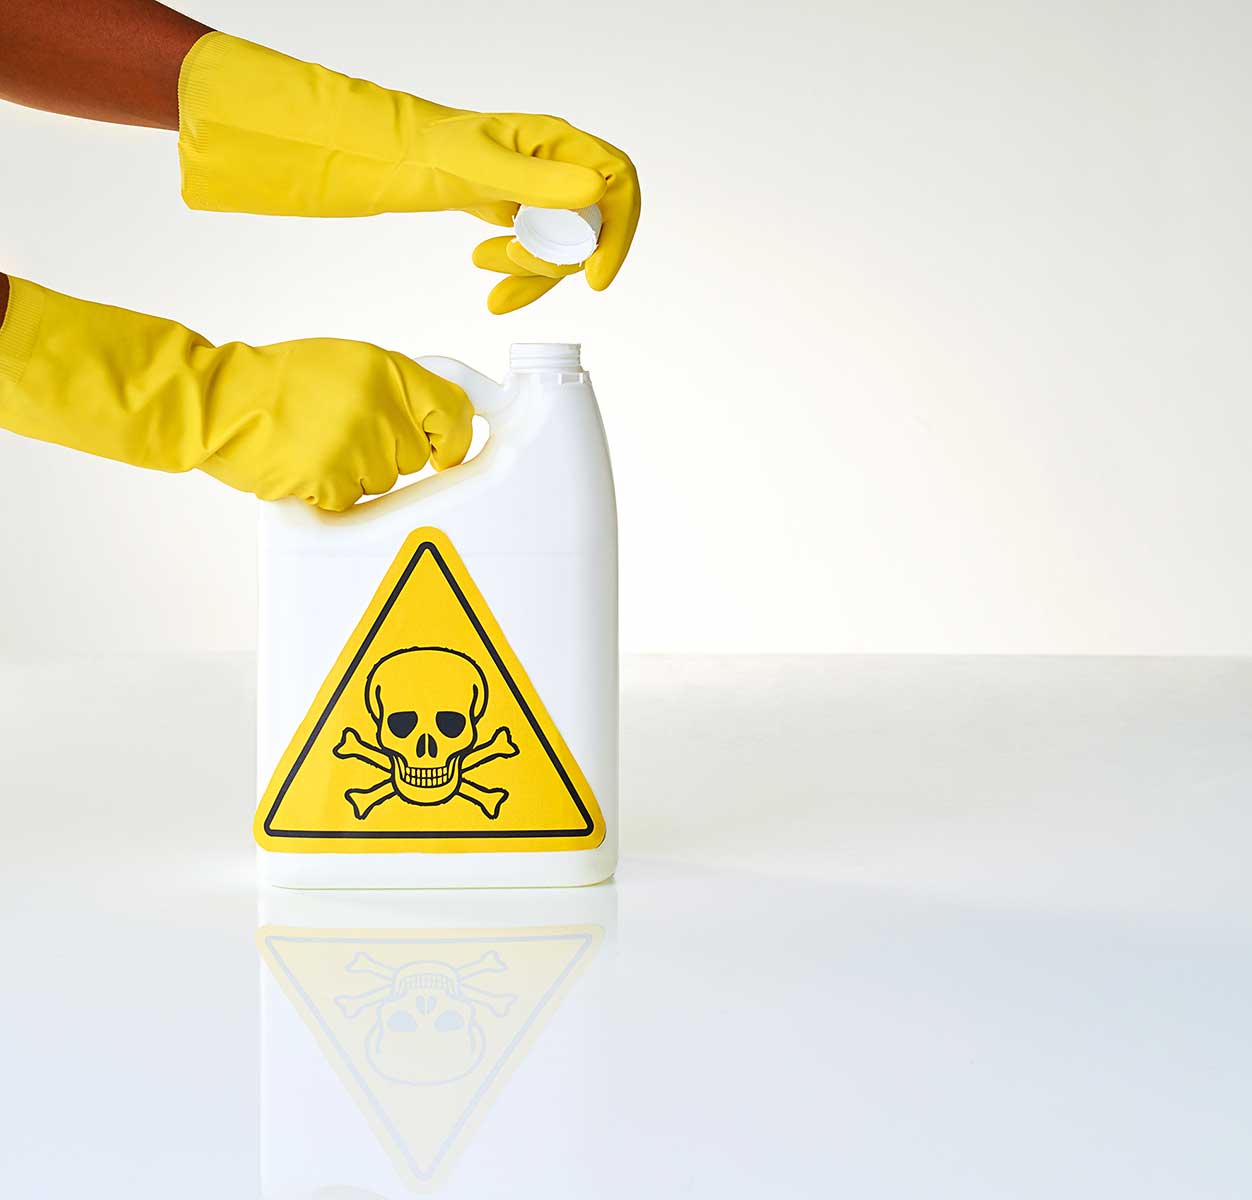 The Toxic Truth About Cleansing Detergents - How to Make Smarter Eco-Friendly Laundry Practices